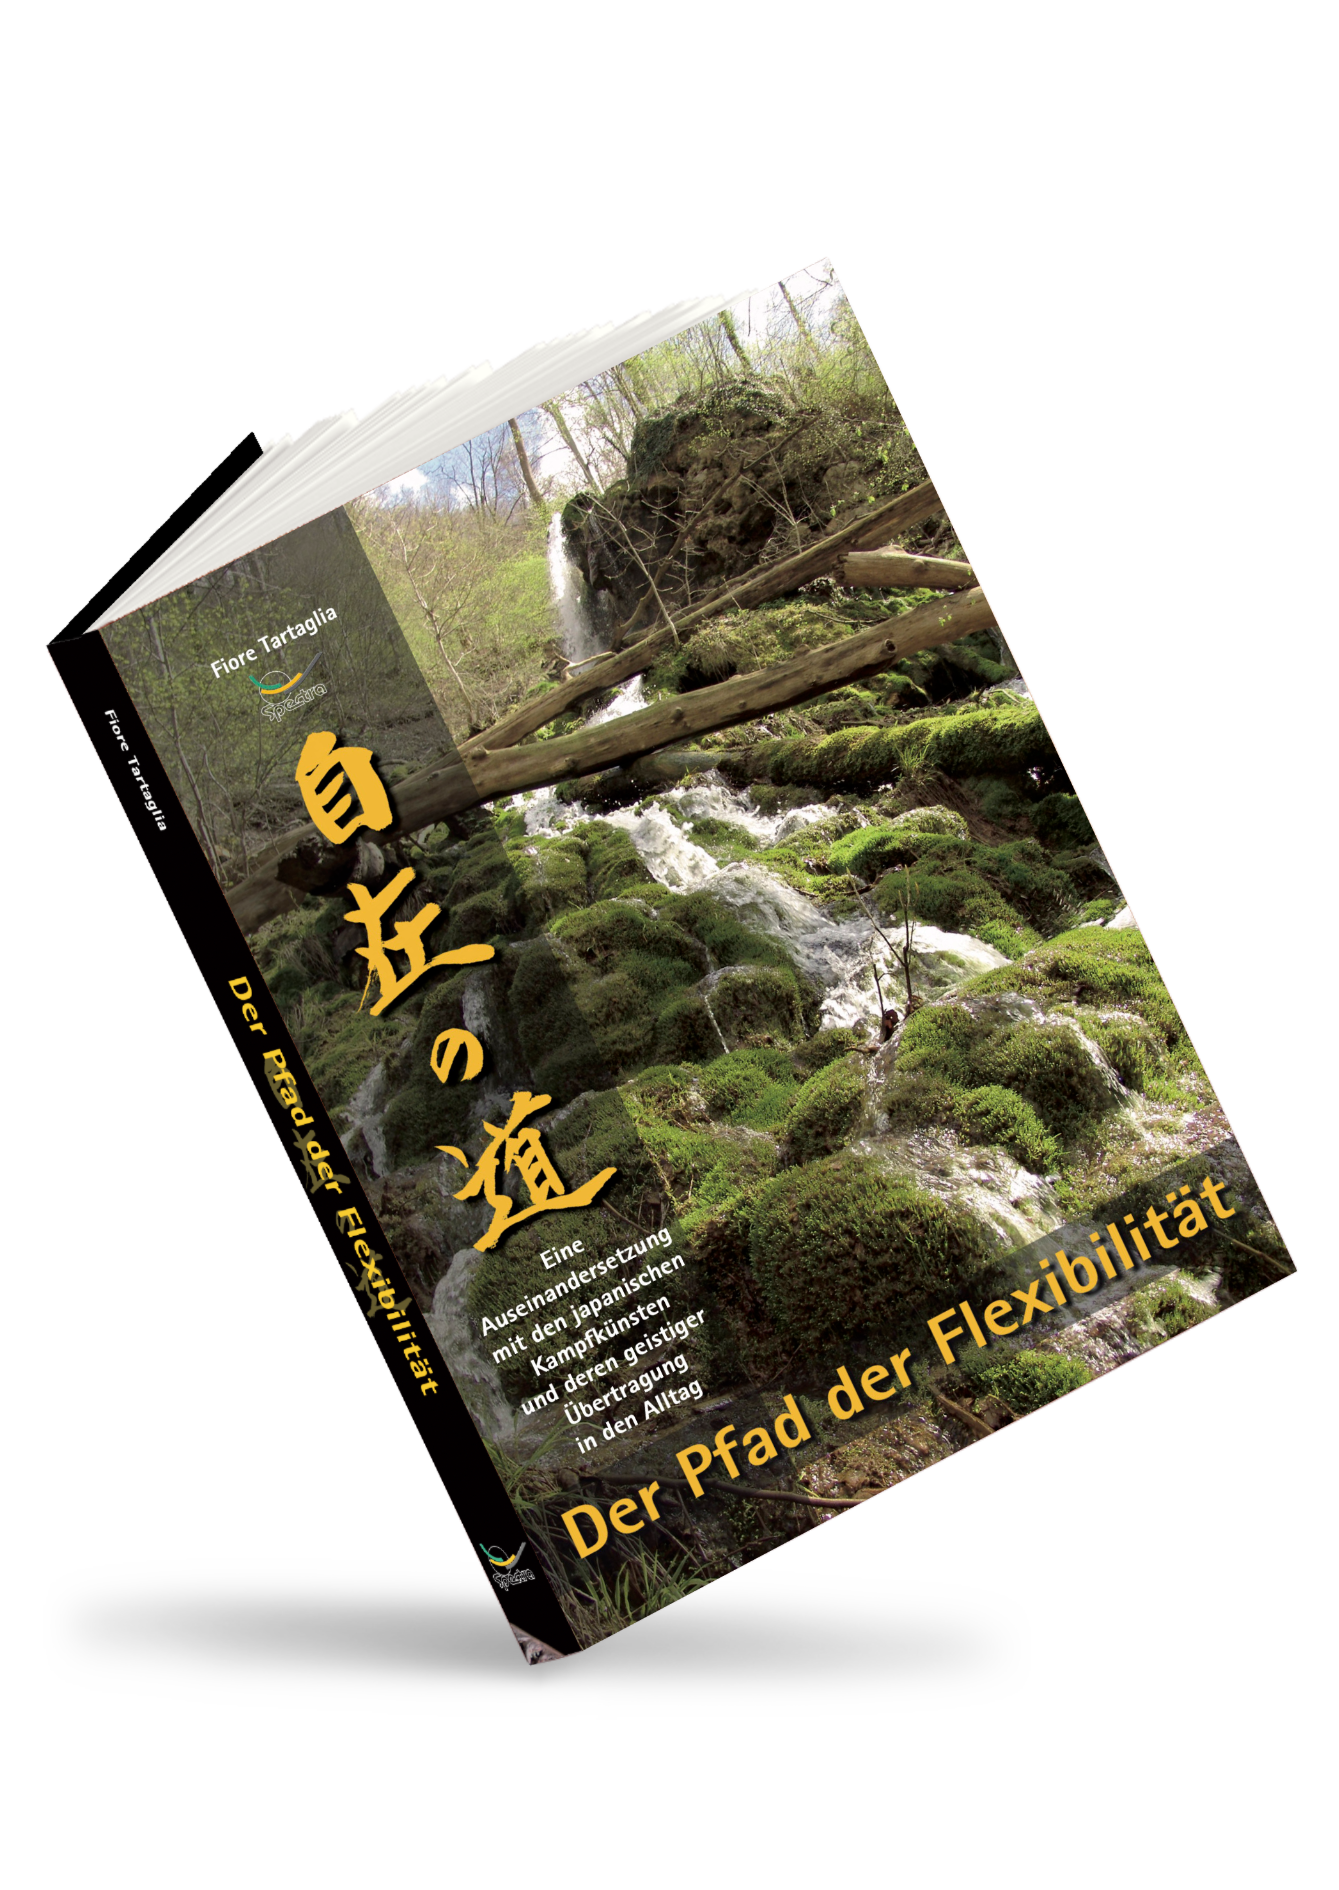 🇩🇪 Book | The path of flexibility